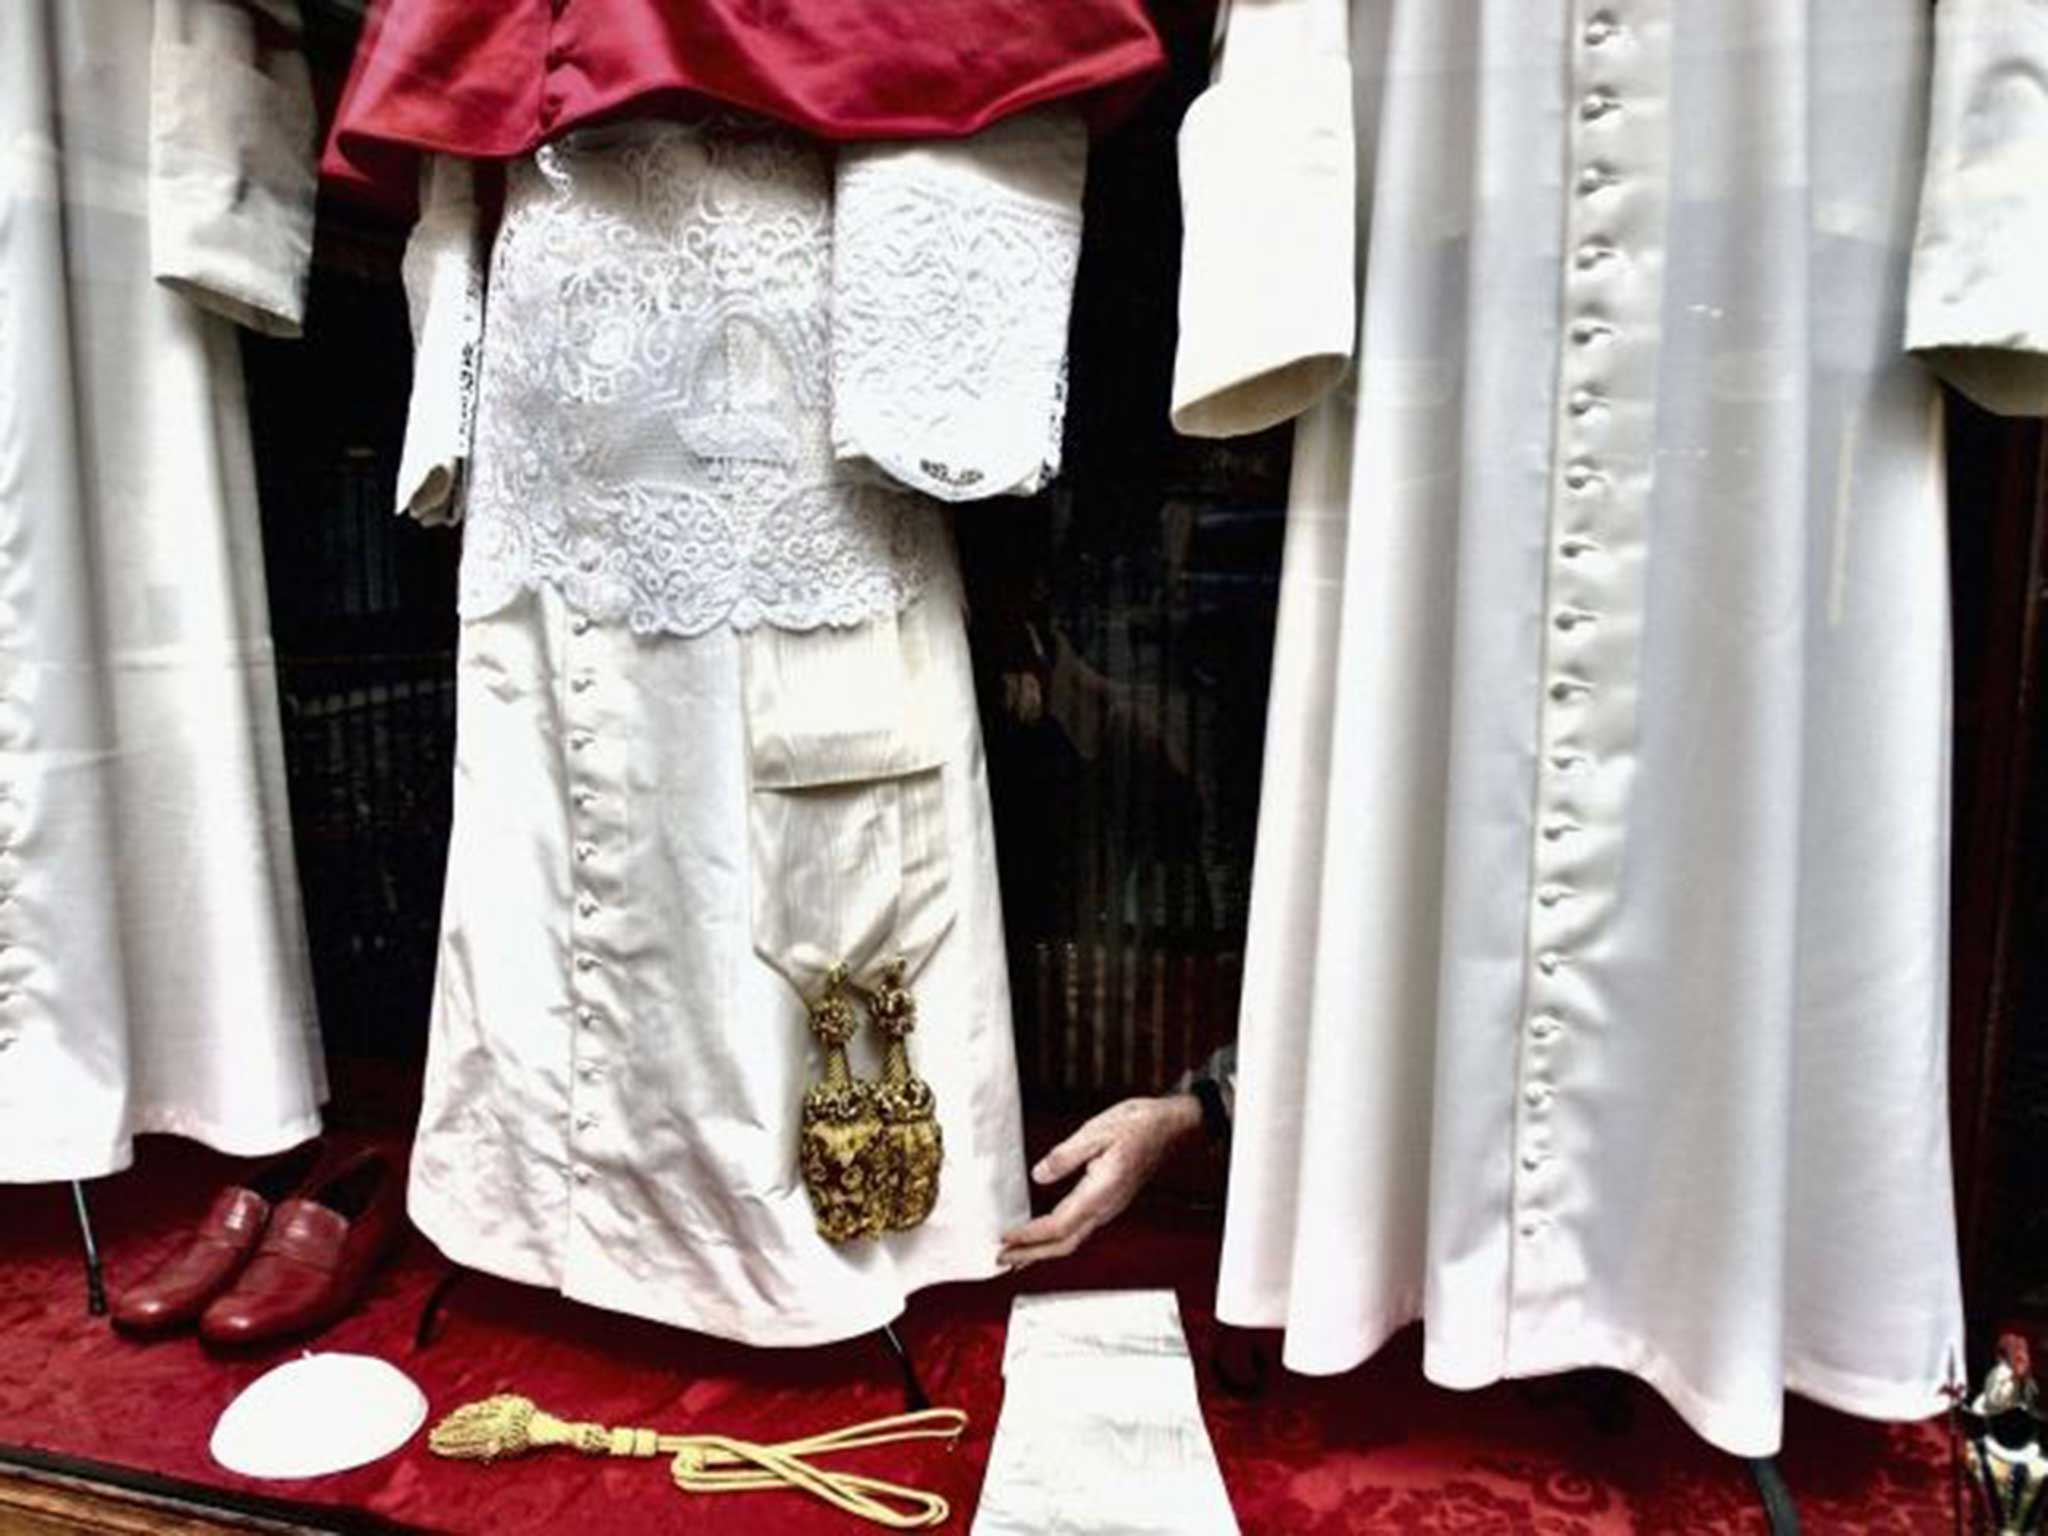 The hand-embroided Papal gowns